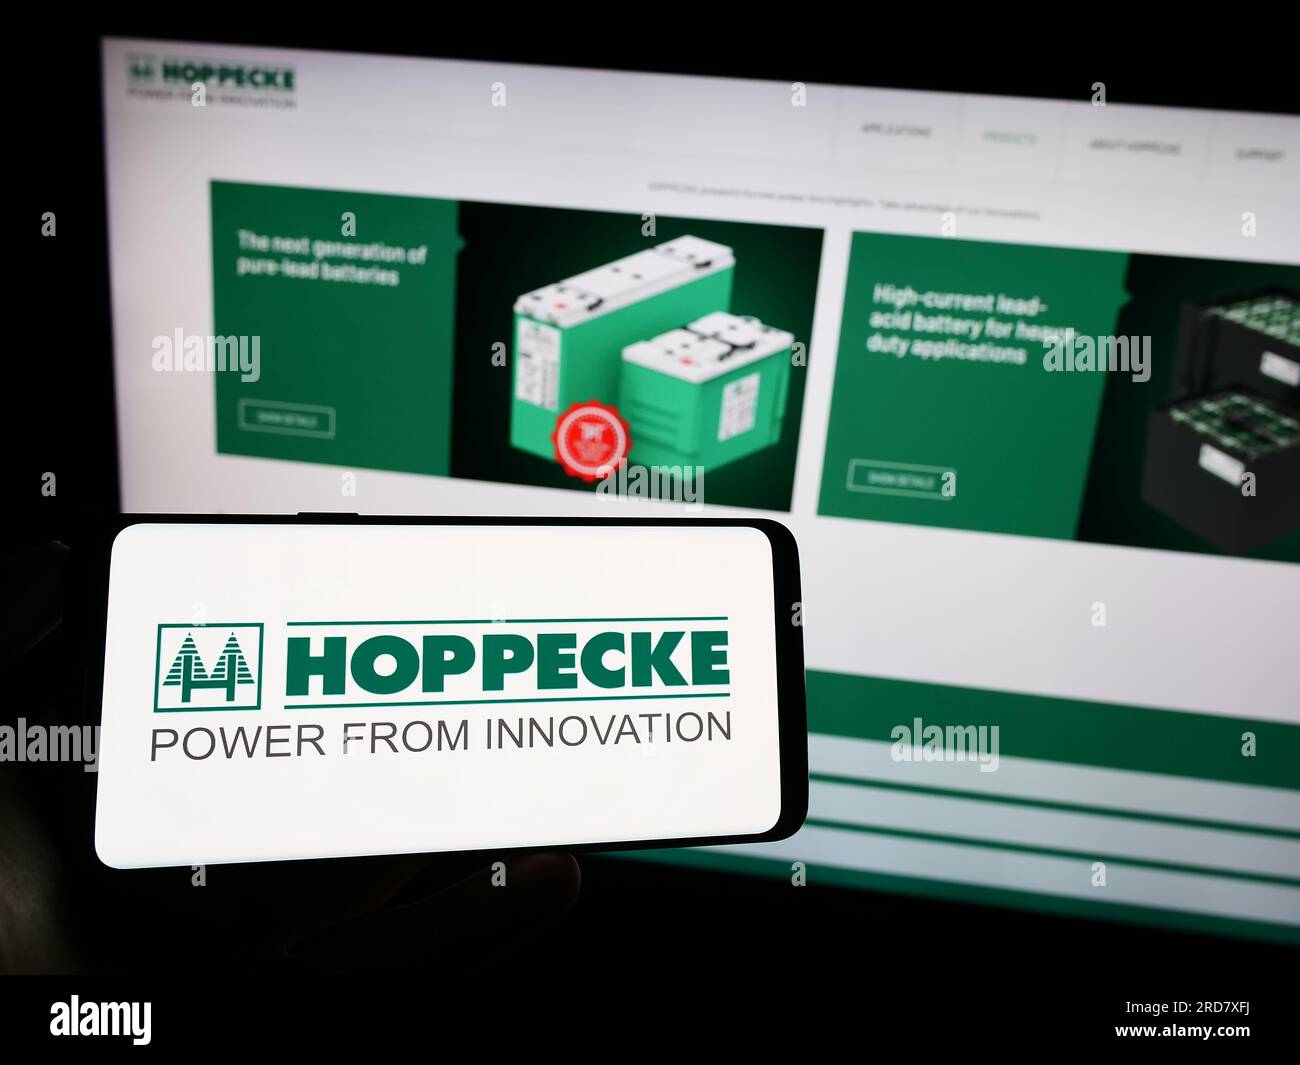 Person holding mobile phone with logo of German company Accumulatorenwerke Hoppecke on screen in front of web page. Focus on phone display. Stock Photo